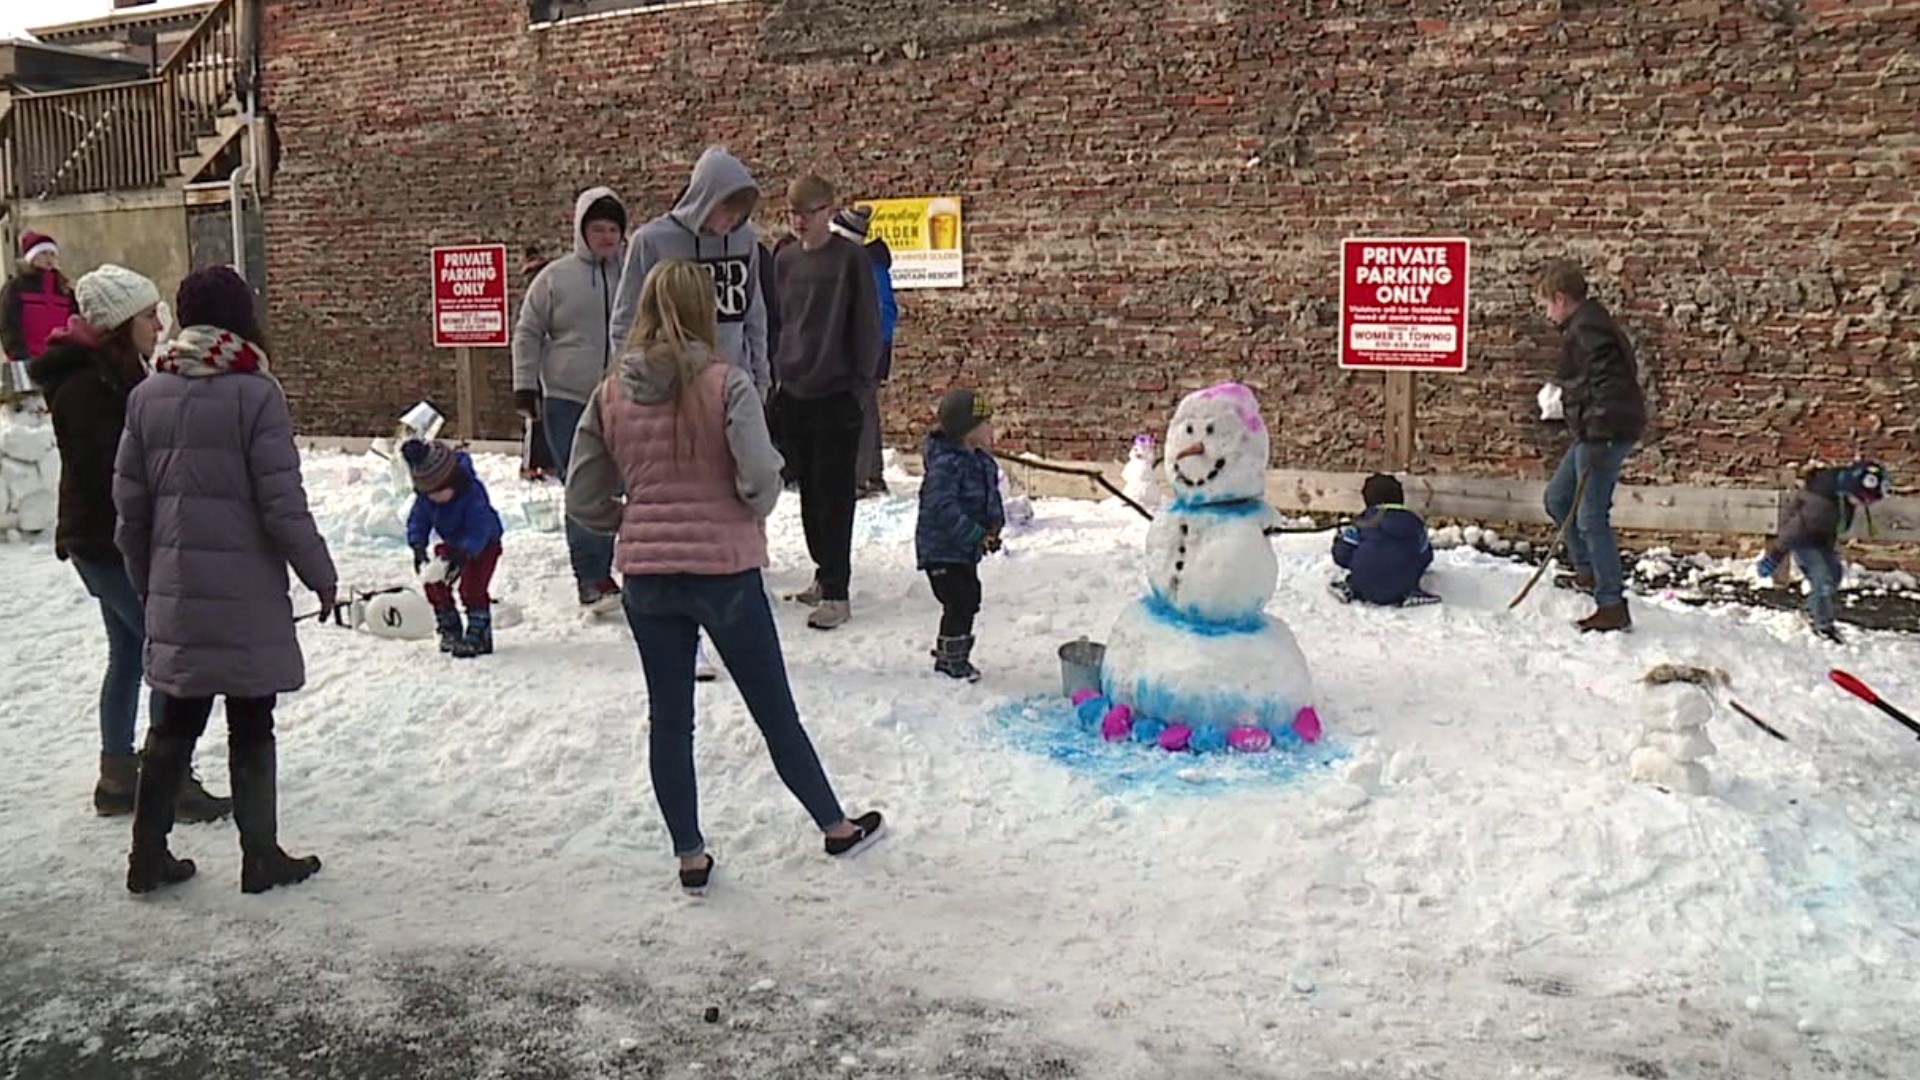 Winterfest is back for the first time since 2020 in downtown Pottsville.